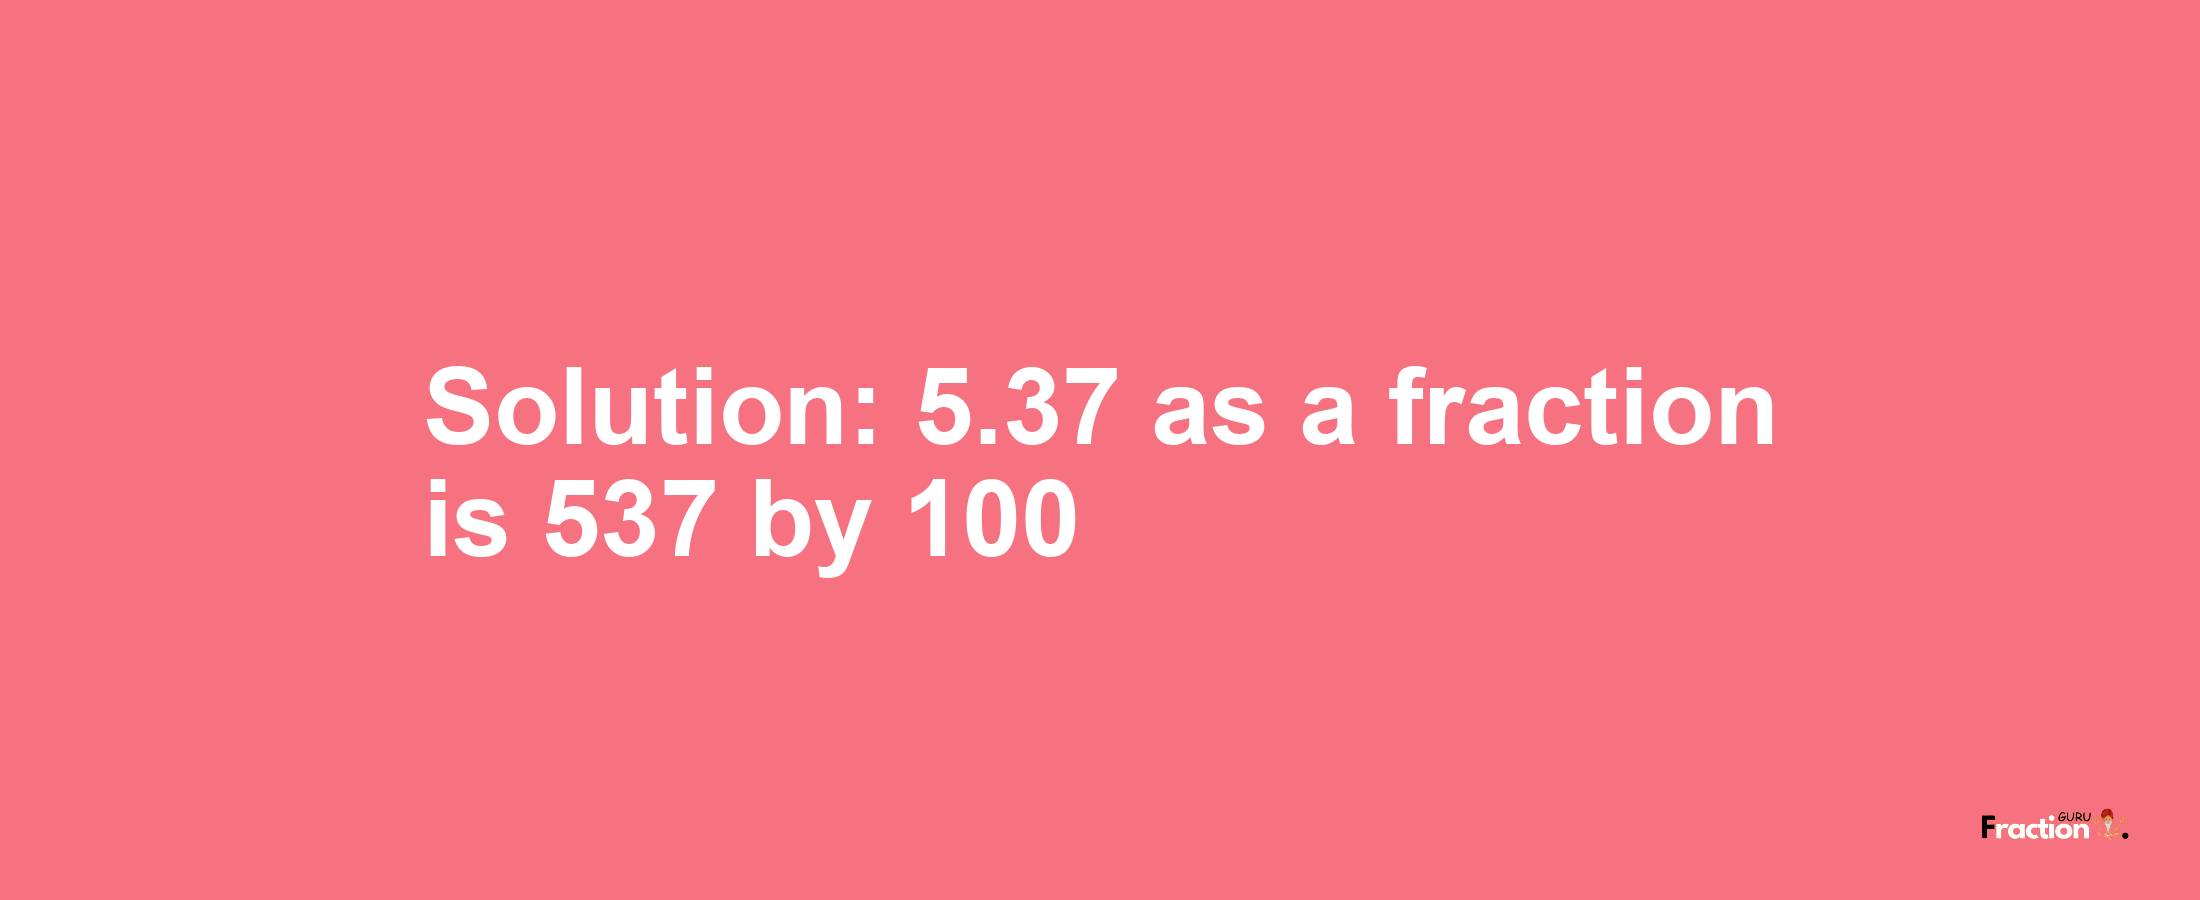 Solution:5.37 as a fraction is 537/100